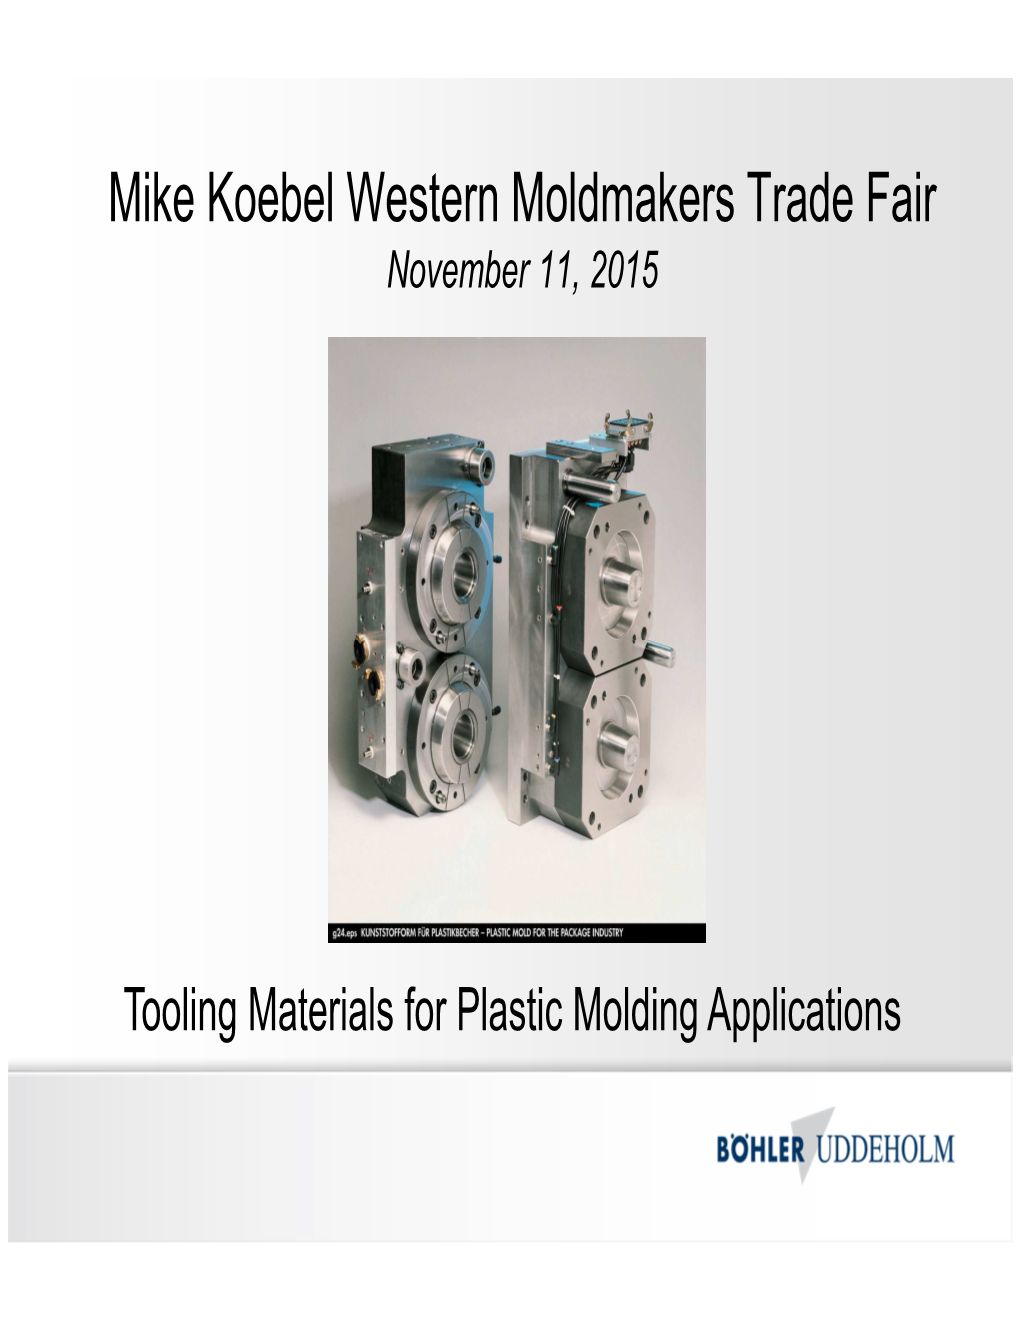 Tooling Materials for Plastic Molding Applications Factors That Determine Mold Steel Requirements